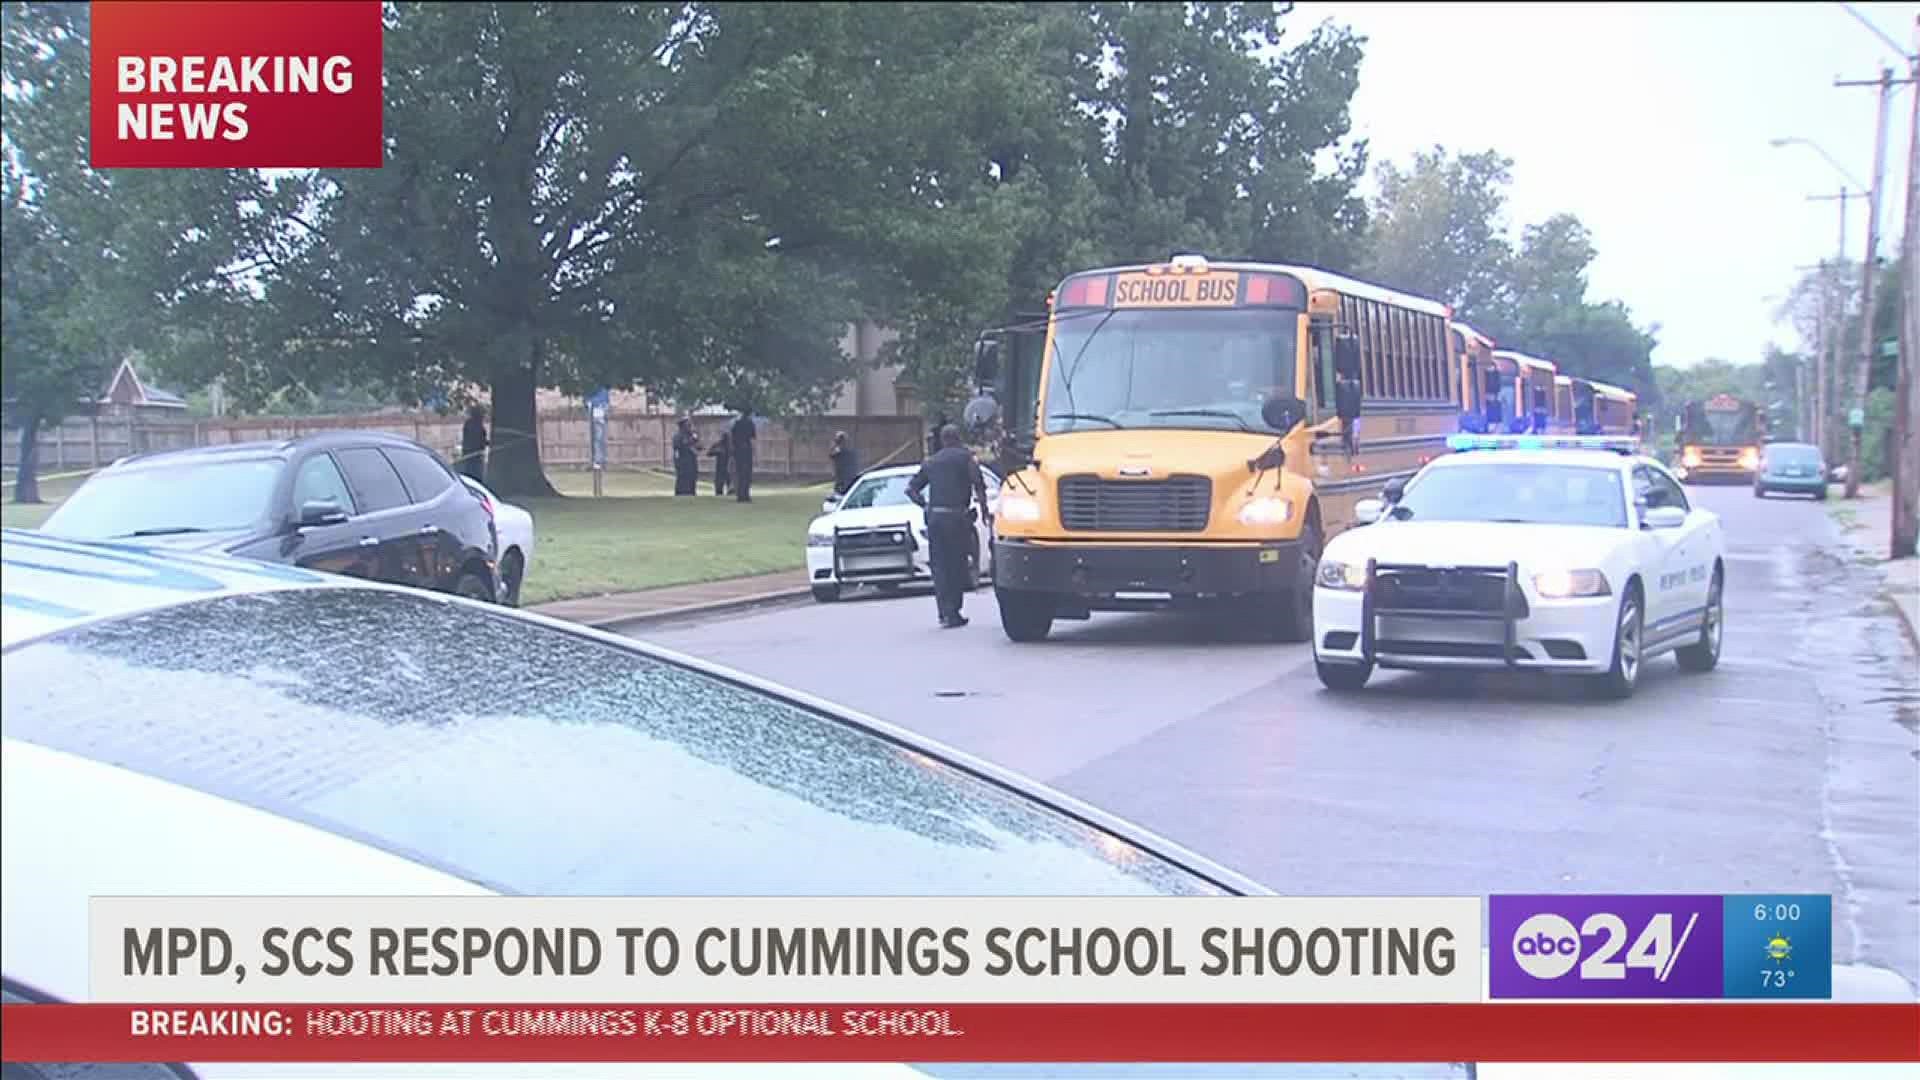 Shelby County Schools leaders said the boy who was shot, also 13-years-old, is expected to make a full recovery. Classes at Cummings resume Friday morning.